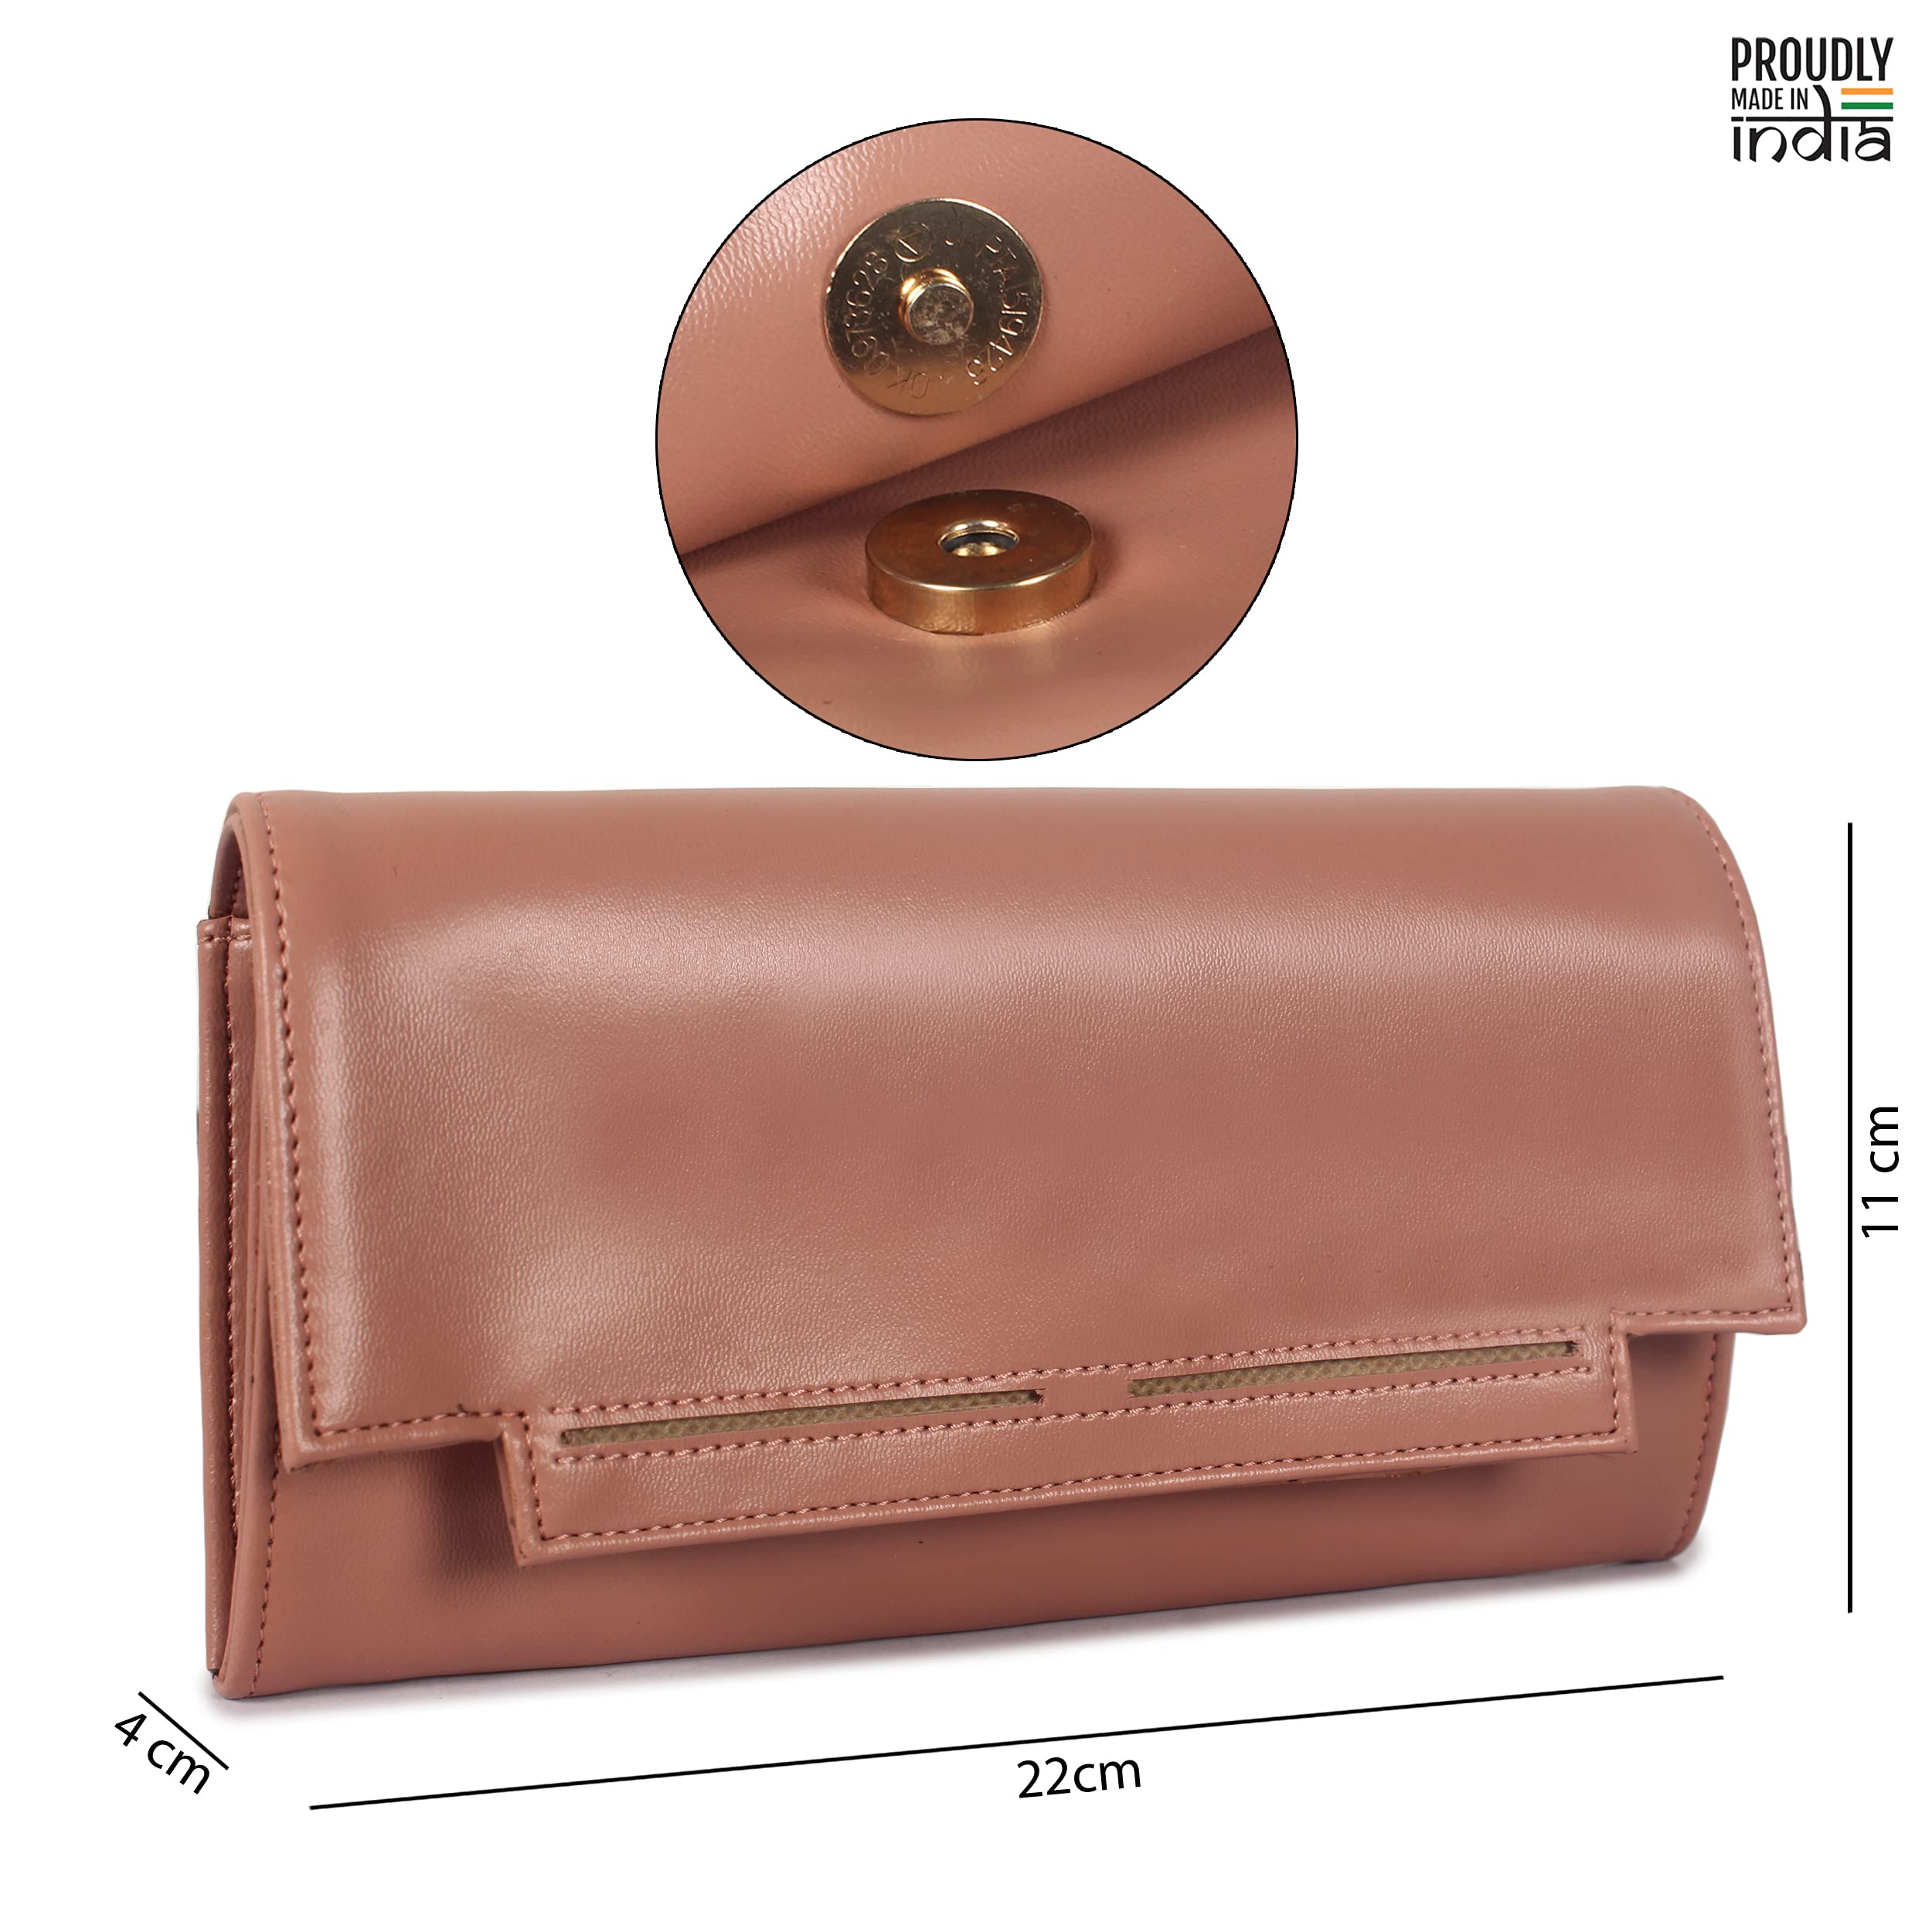 Buy AURASmall Ladies Purse - Stylish RFID Blocking Card Wallet for Women -  Compact Credit Card Holder with 12 Card Slots, Zip Coin Pocket & 2 Internal  Slots for Notes & Receipts -